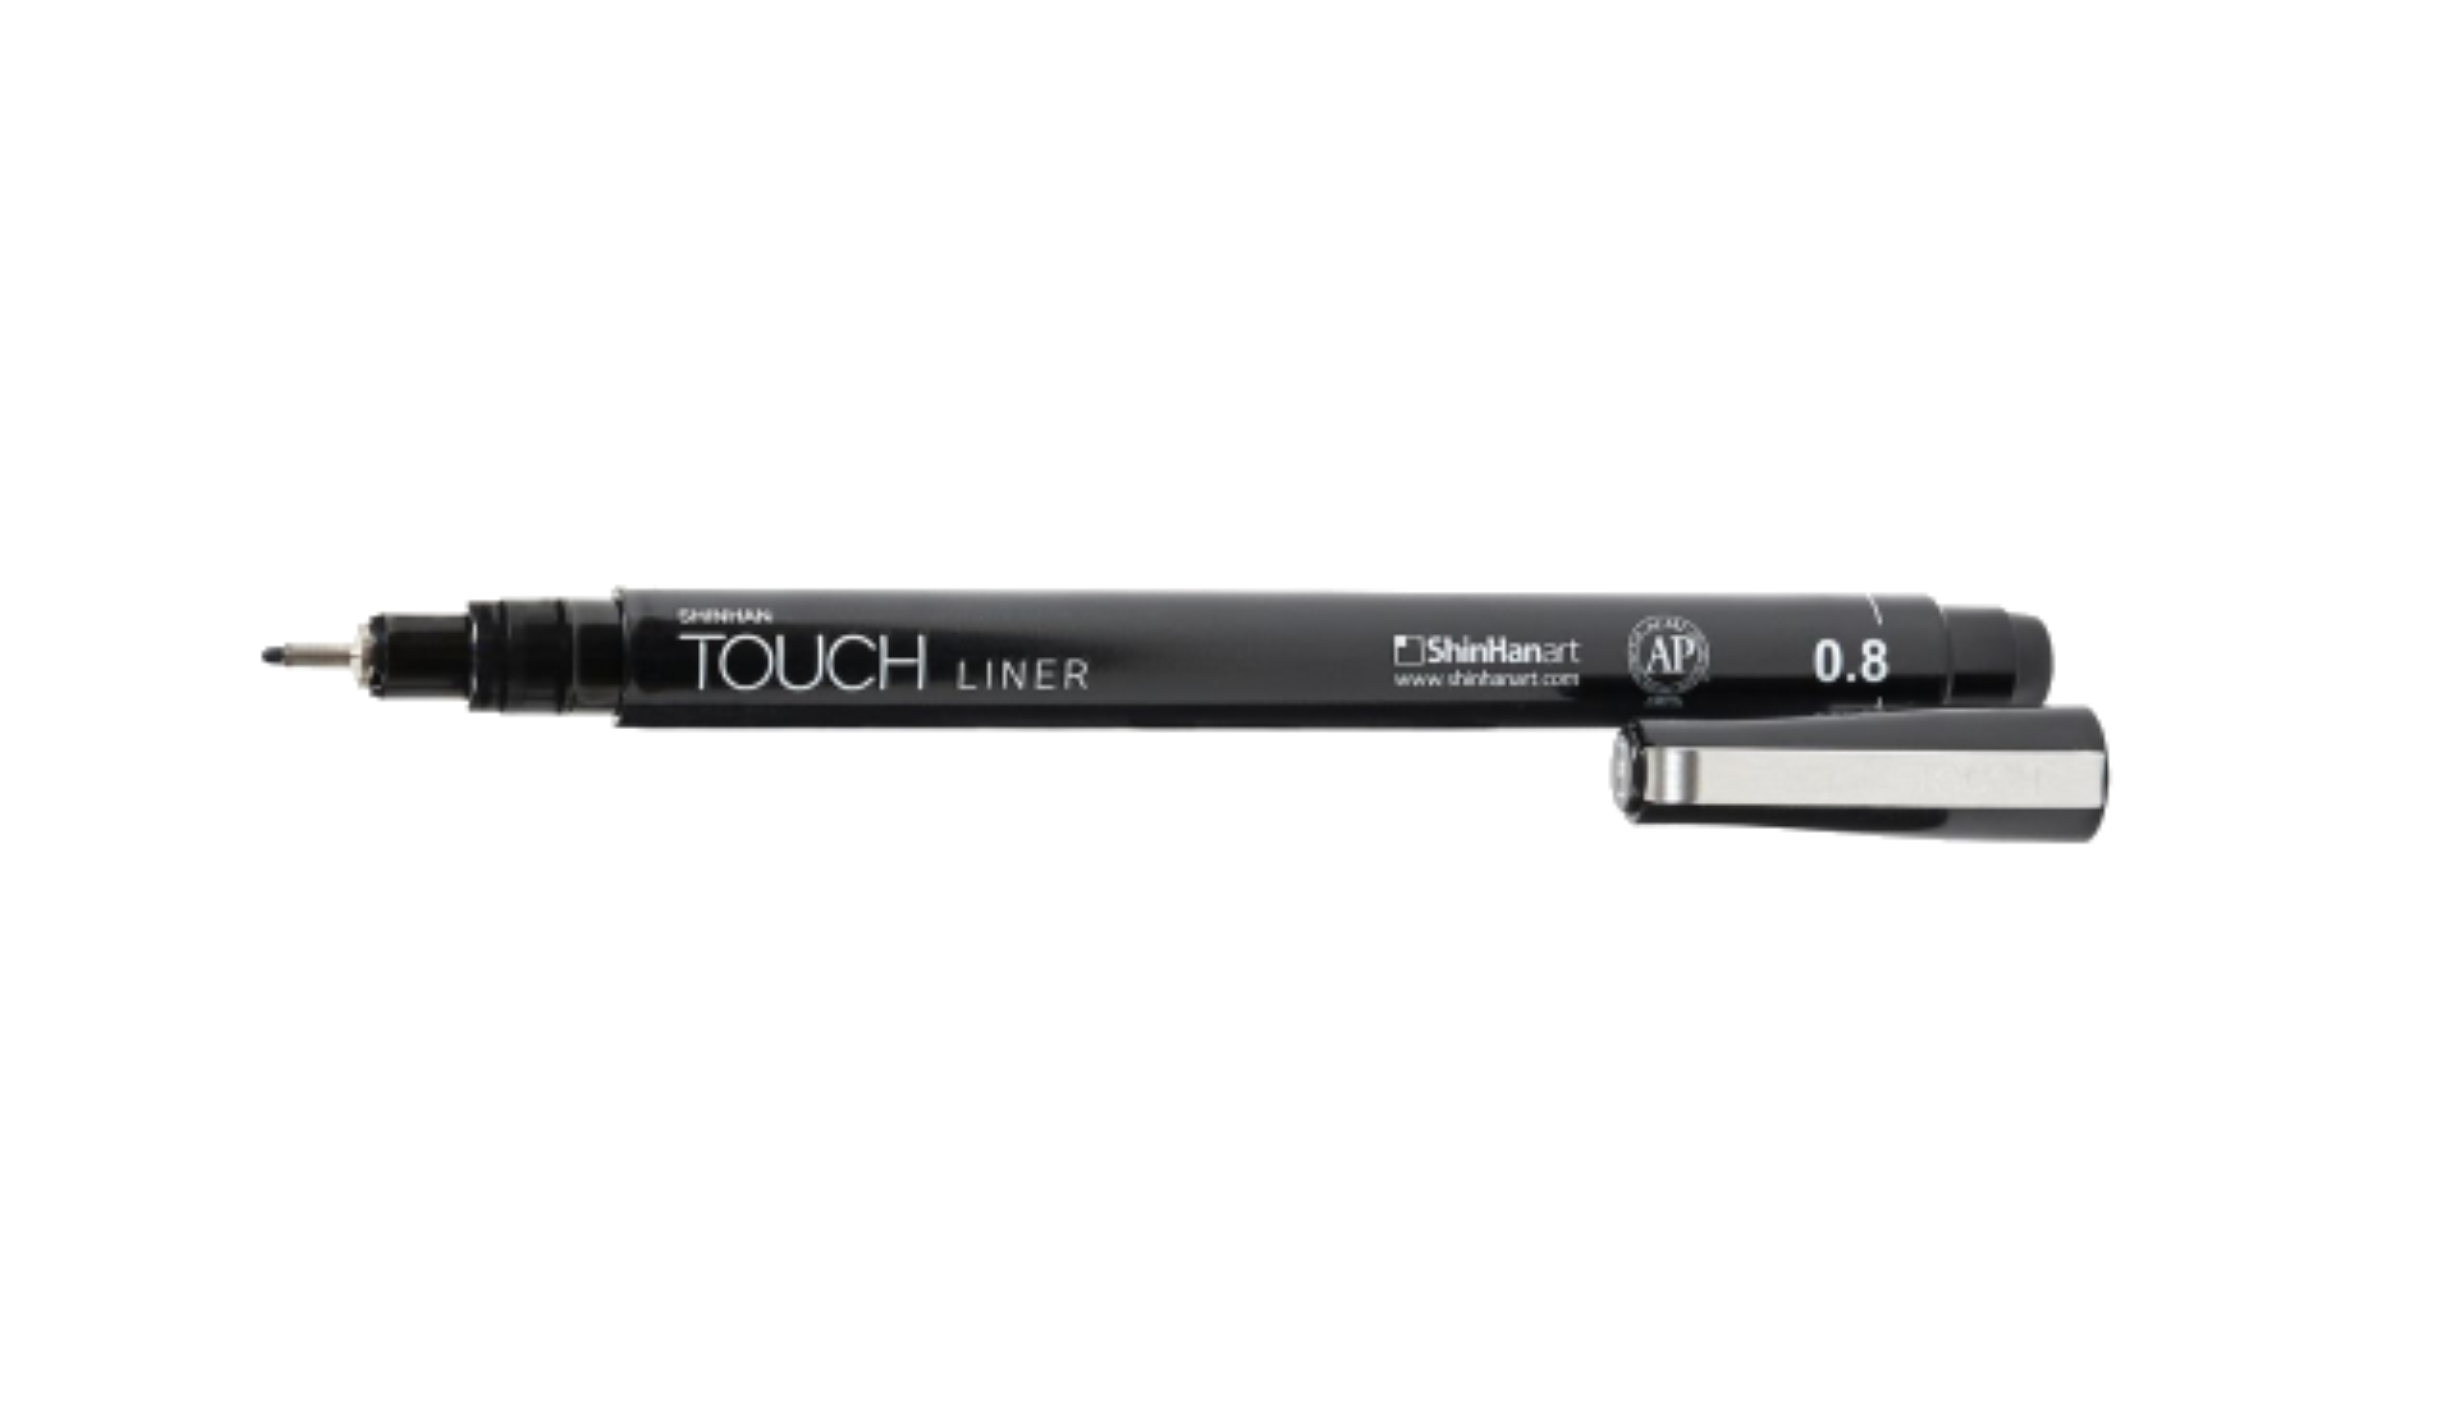 TOUCH Liner